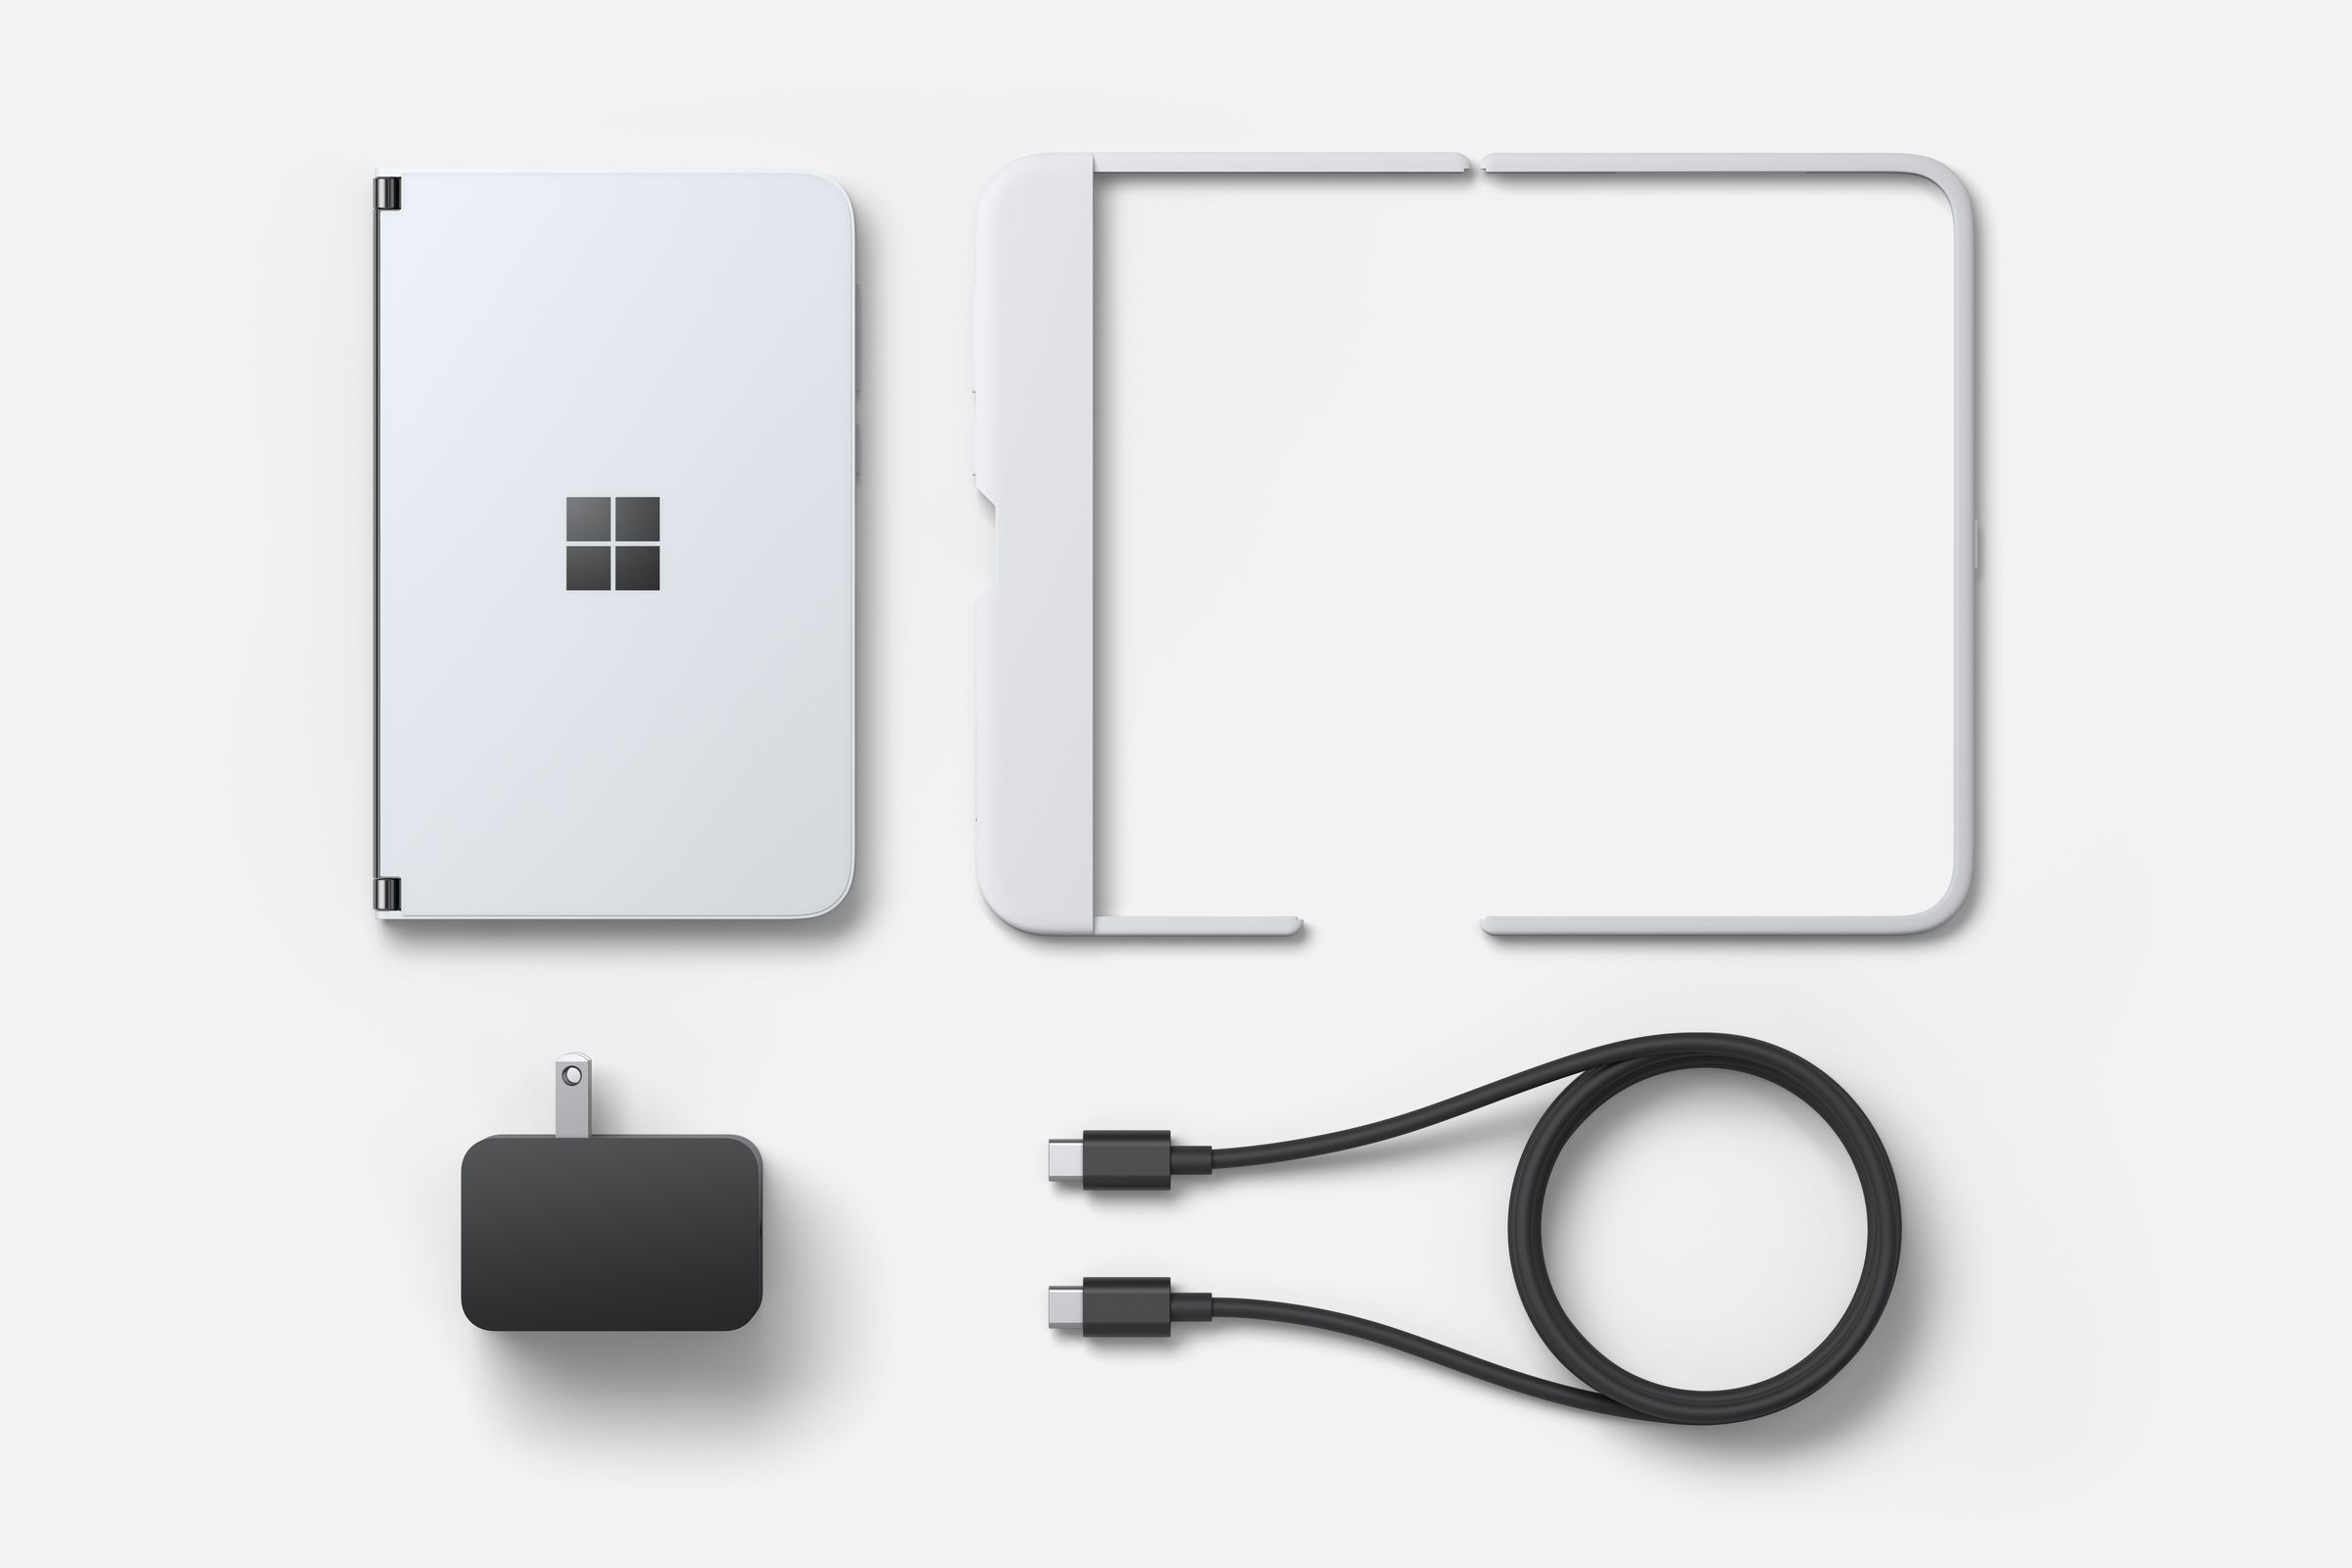 The Surface Duo bumper included in the box.